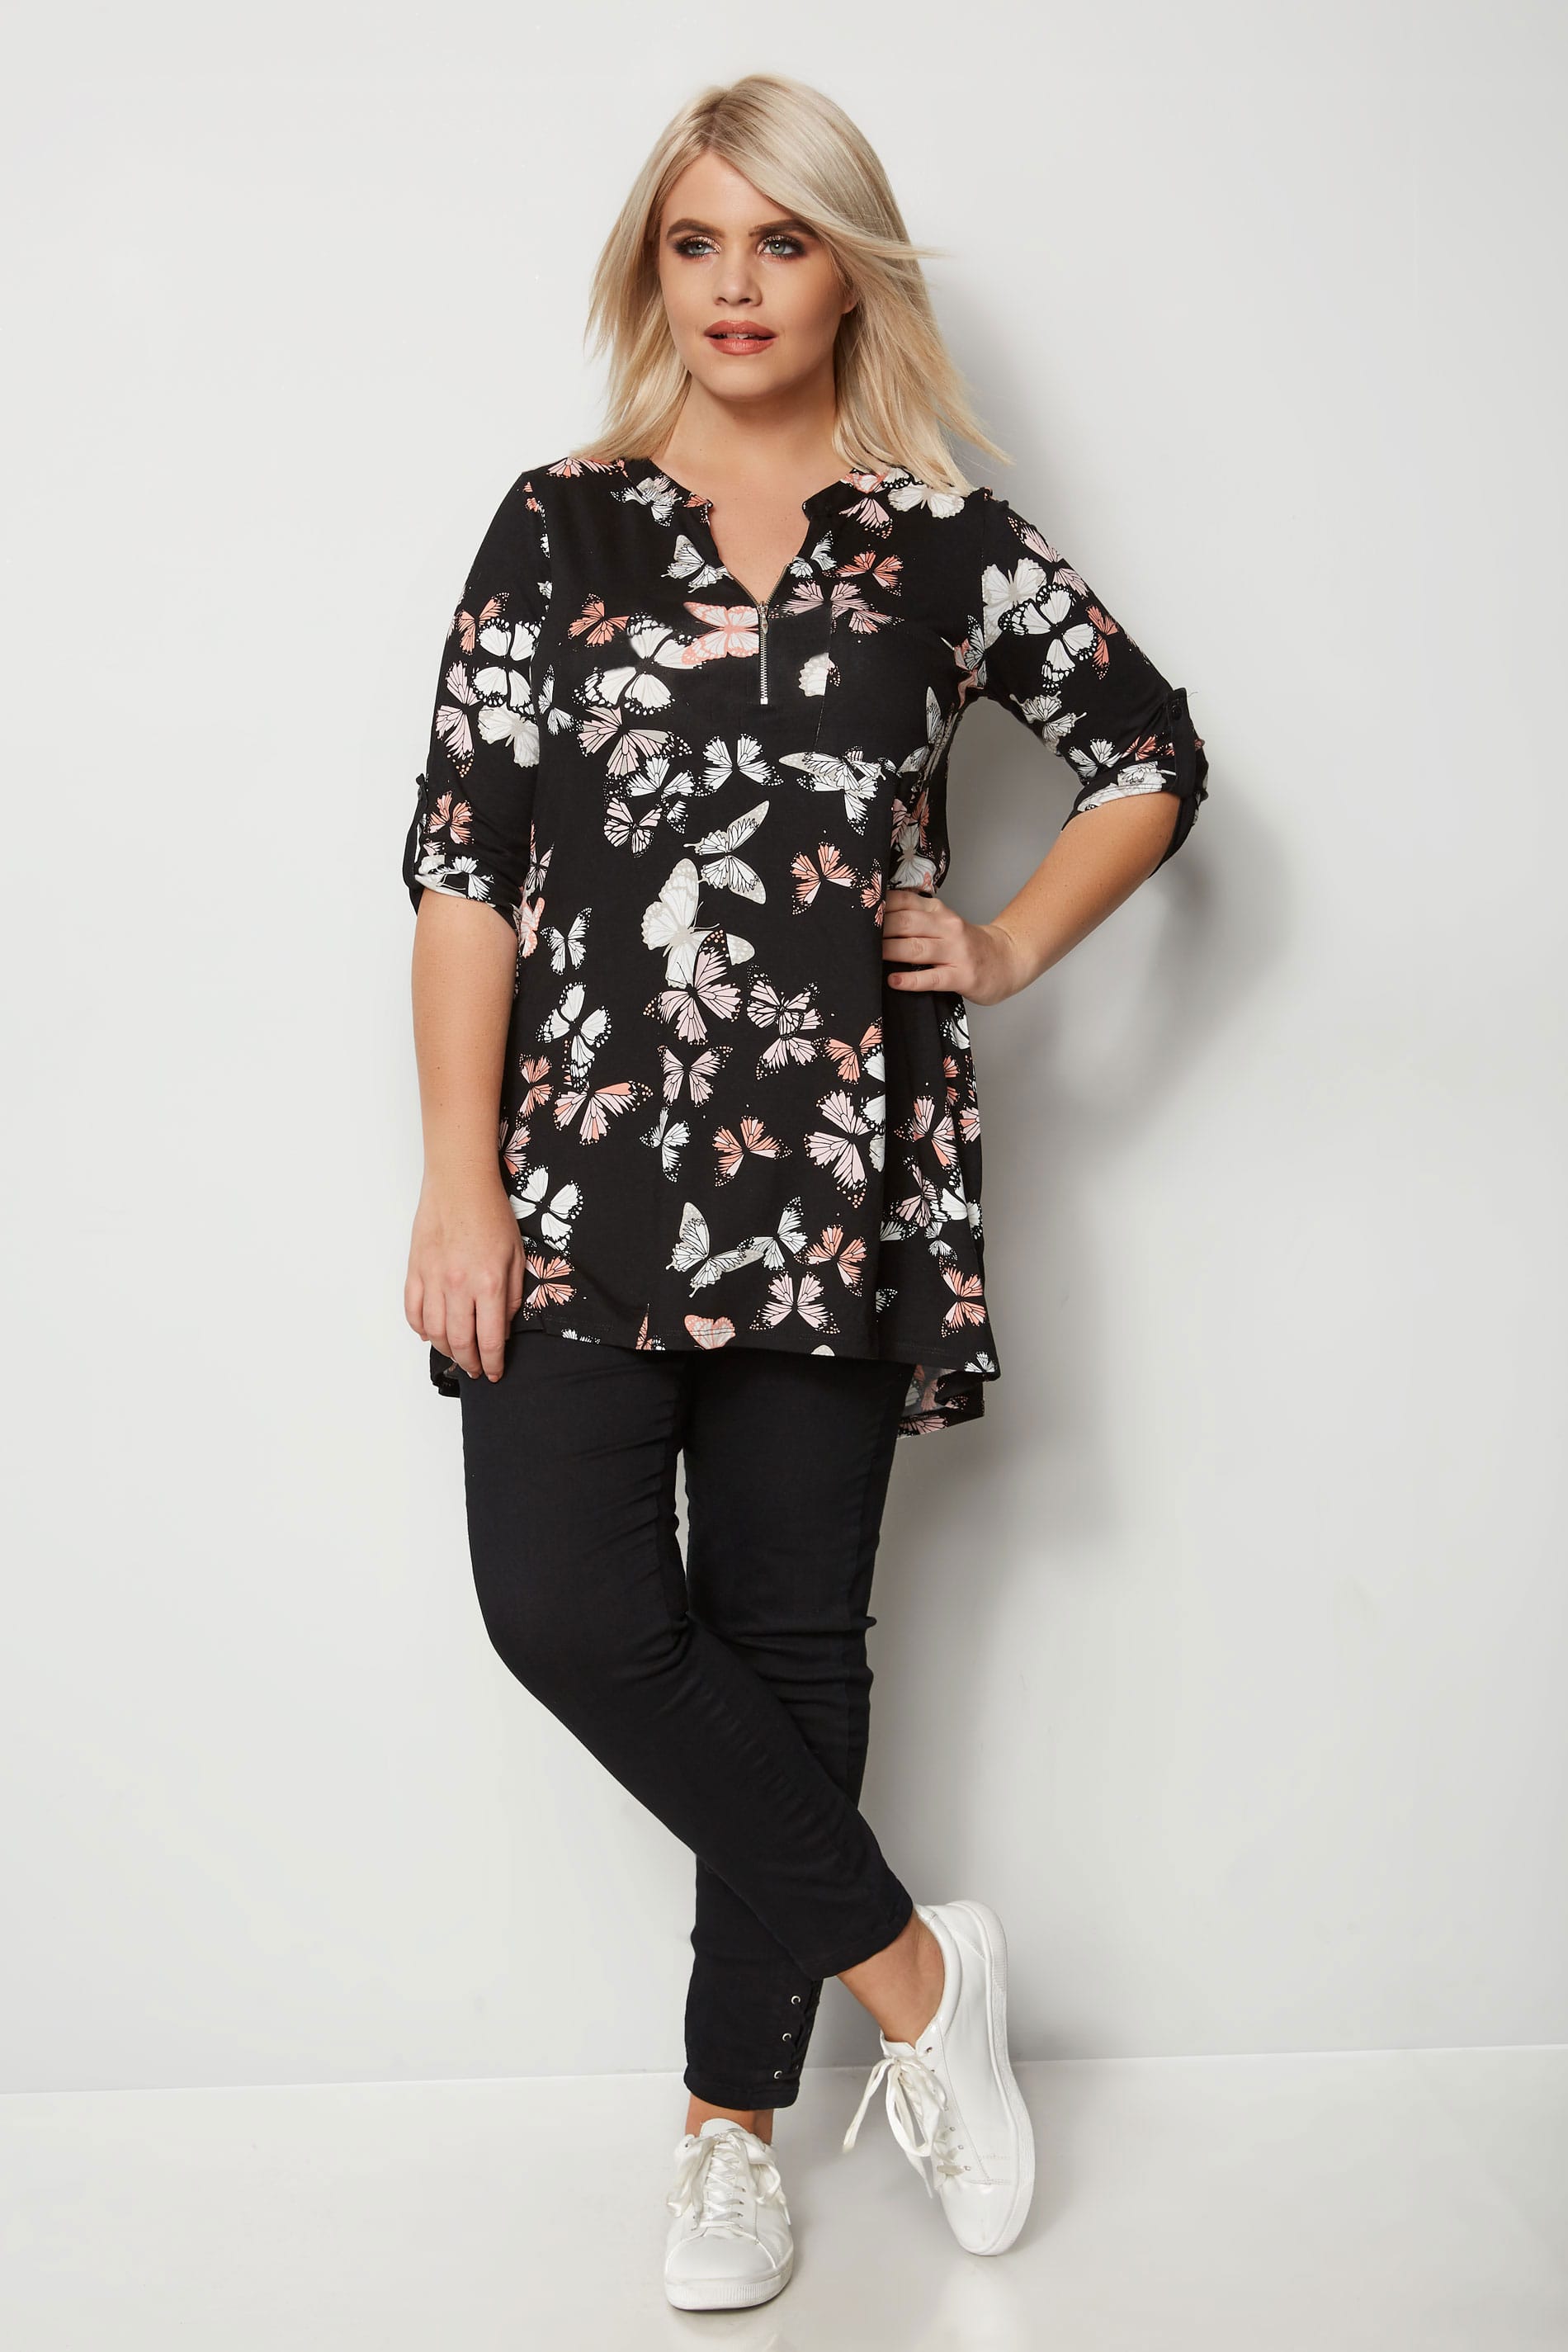 Black & Pink Butterfly Print Longline Top With Zip Front, plus size 16 ...